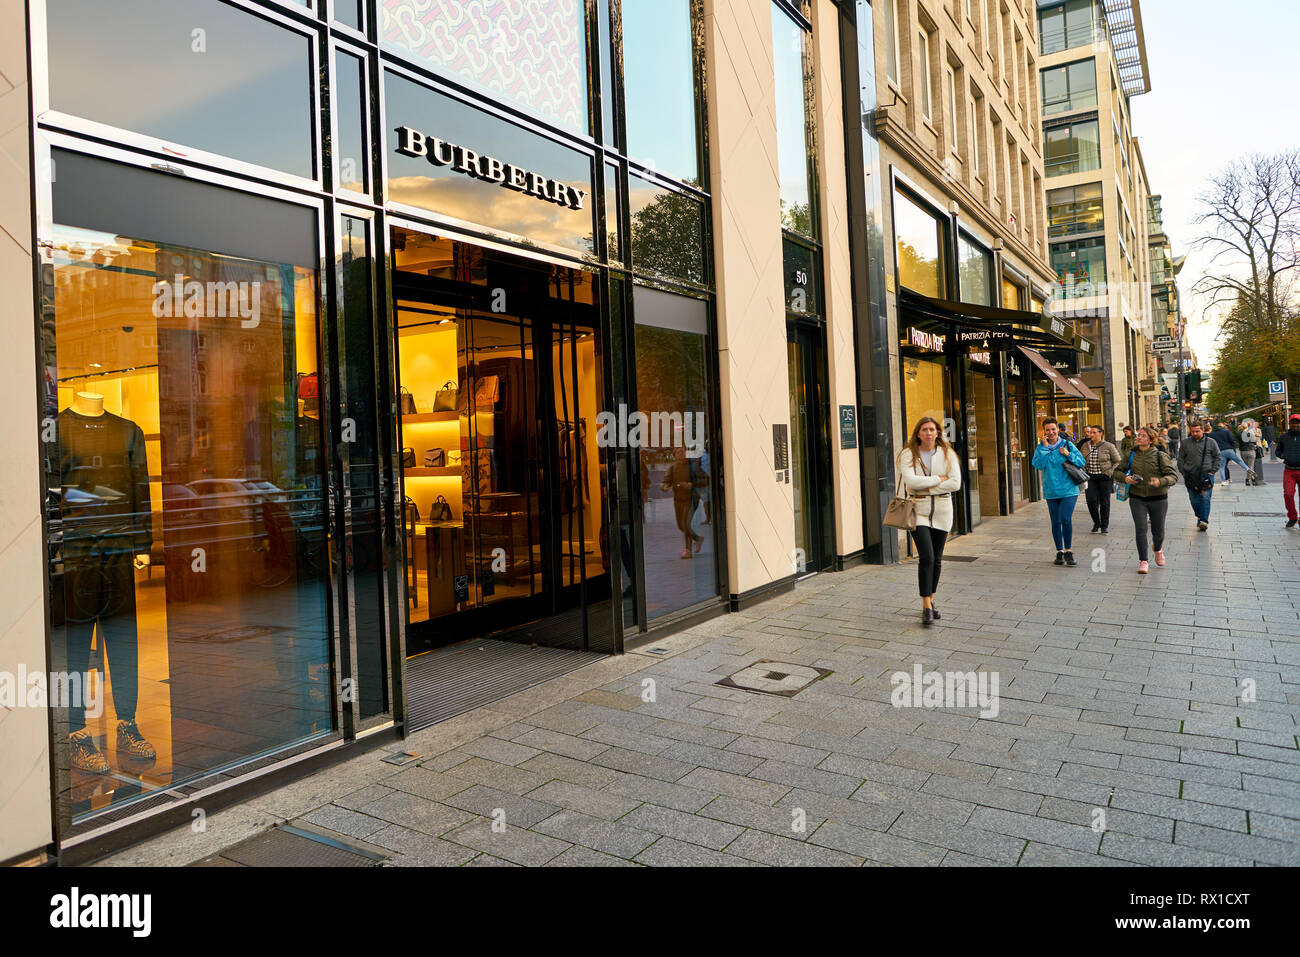 DUSSELDORF, GERMANY - CIRCA SEPTEMBER, 2018: entrance and display at  Burberry shop in Dusseldorf Stock Photo - Alamy